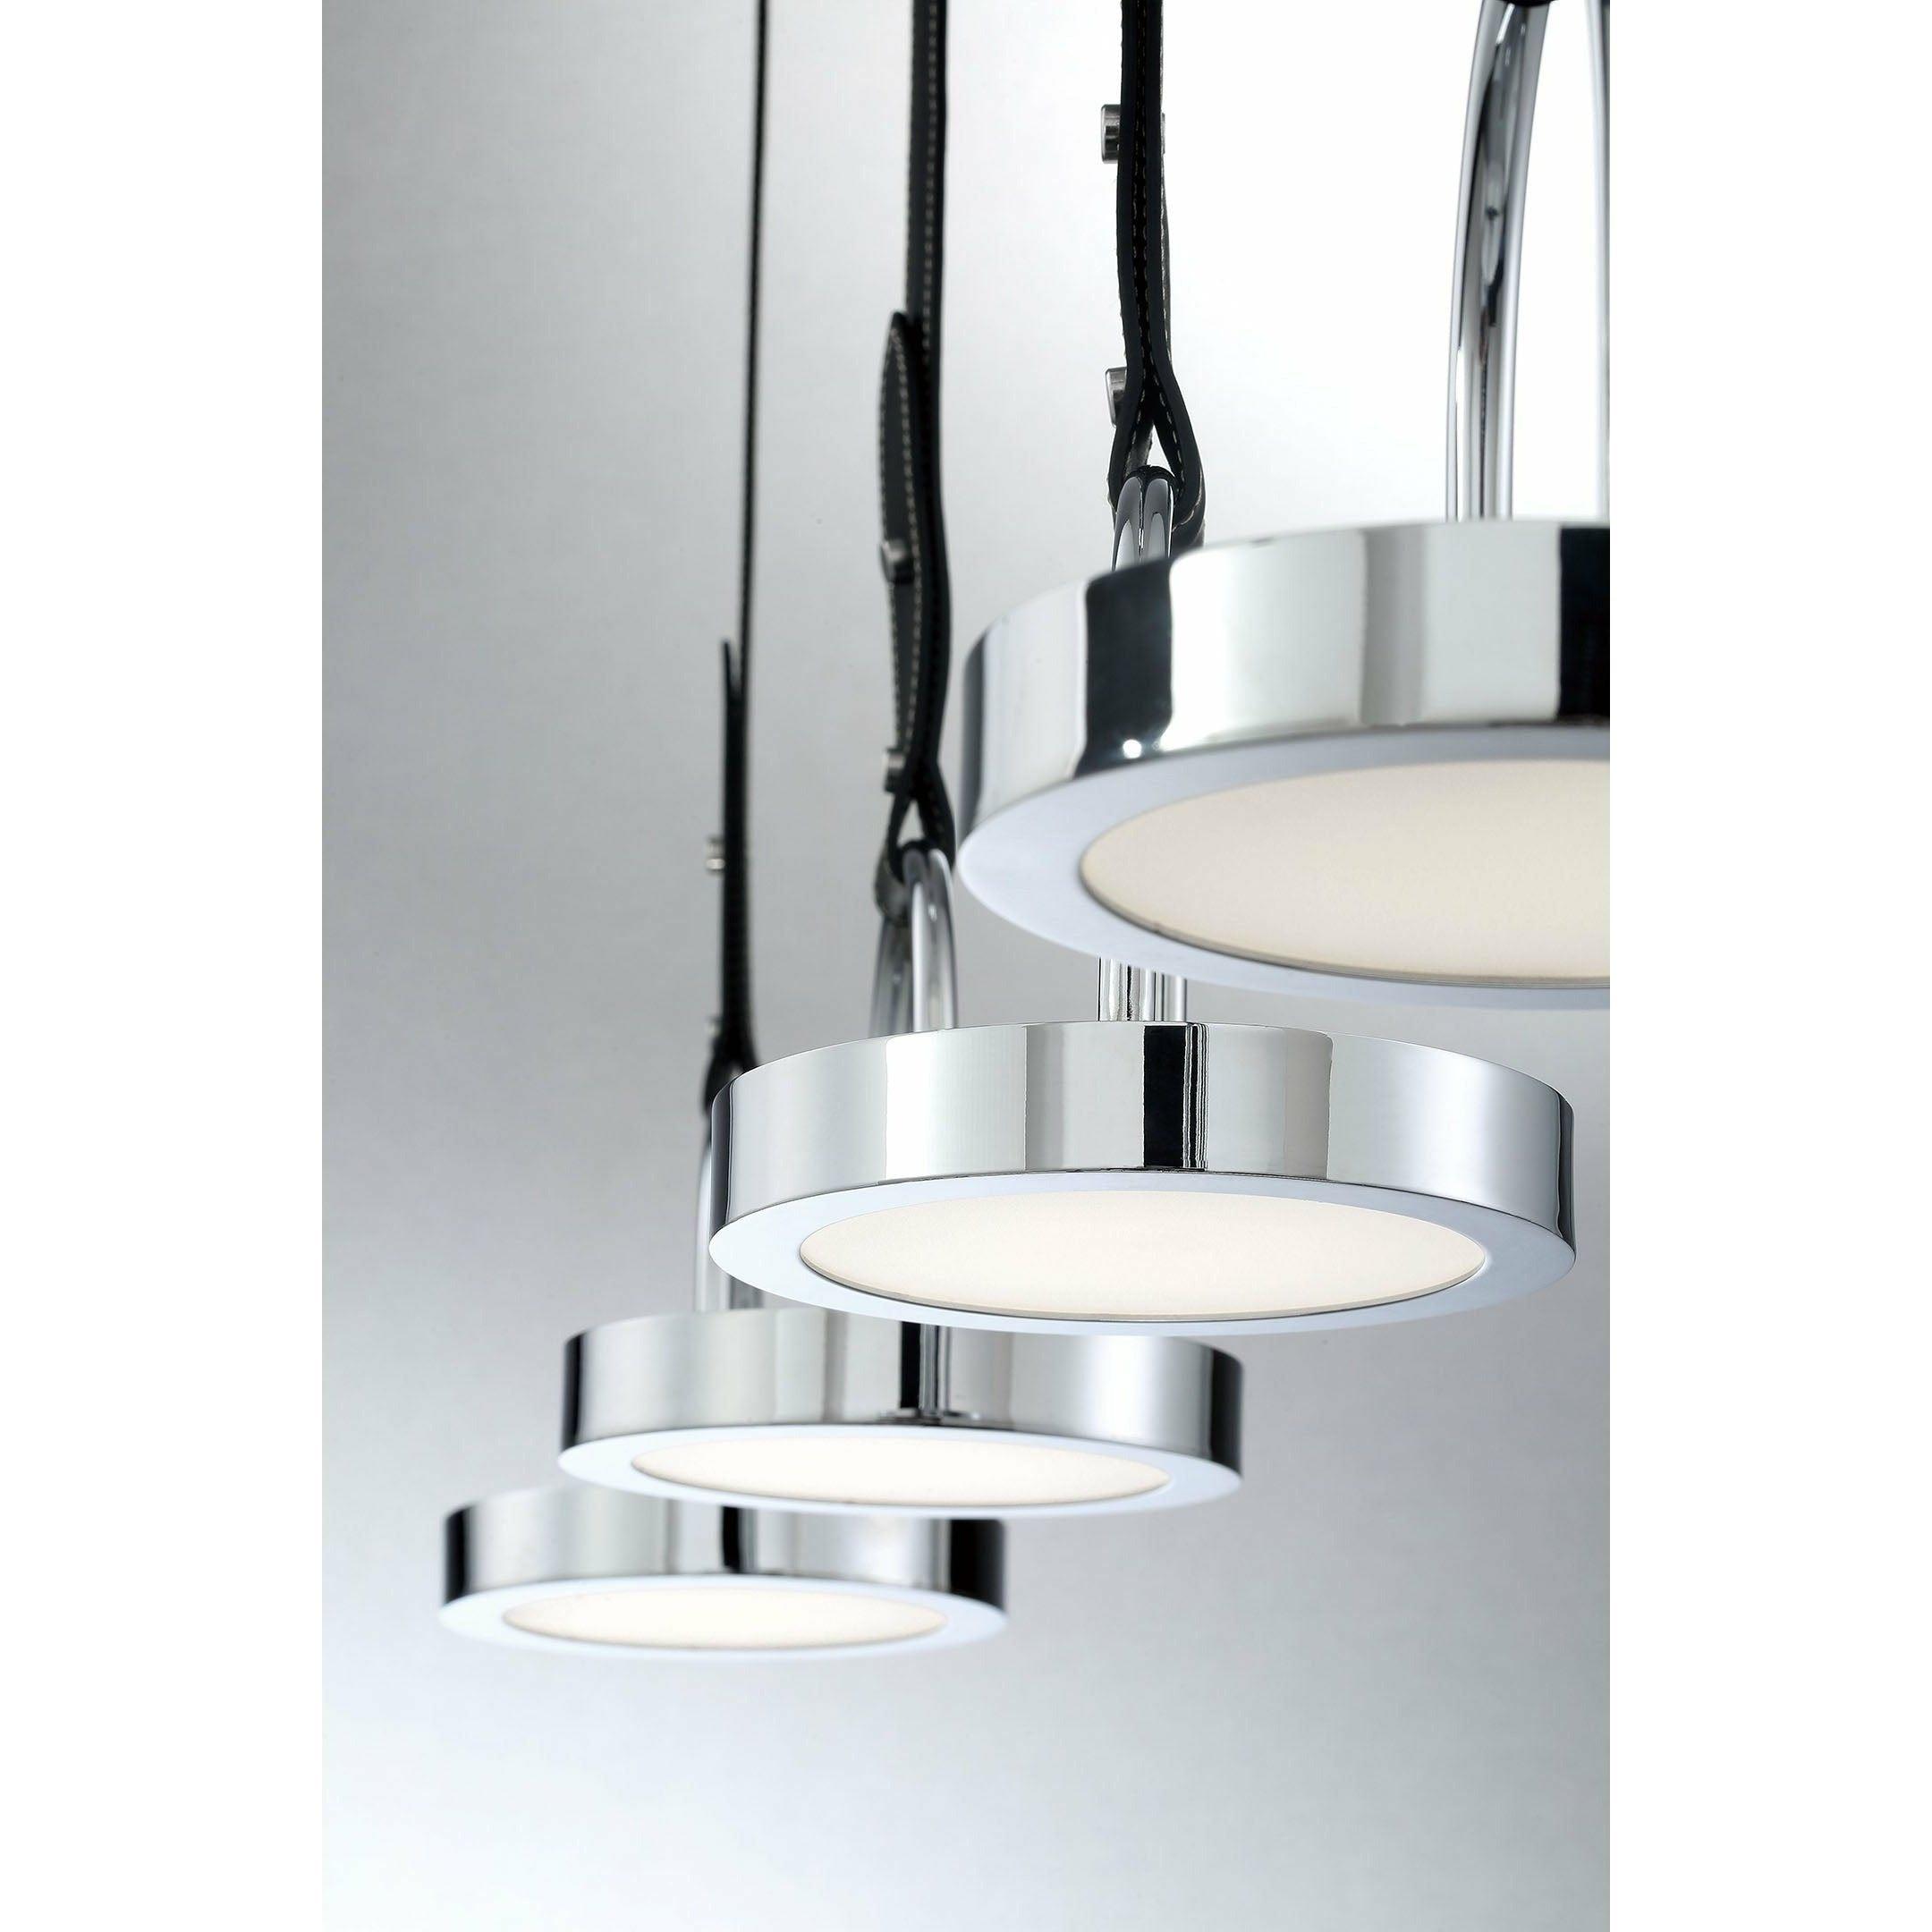 Eurofase - Lappin Chandelier - Lights Canada